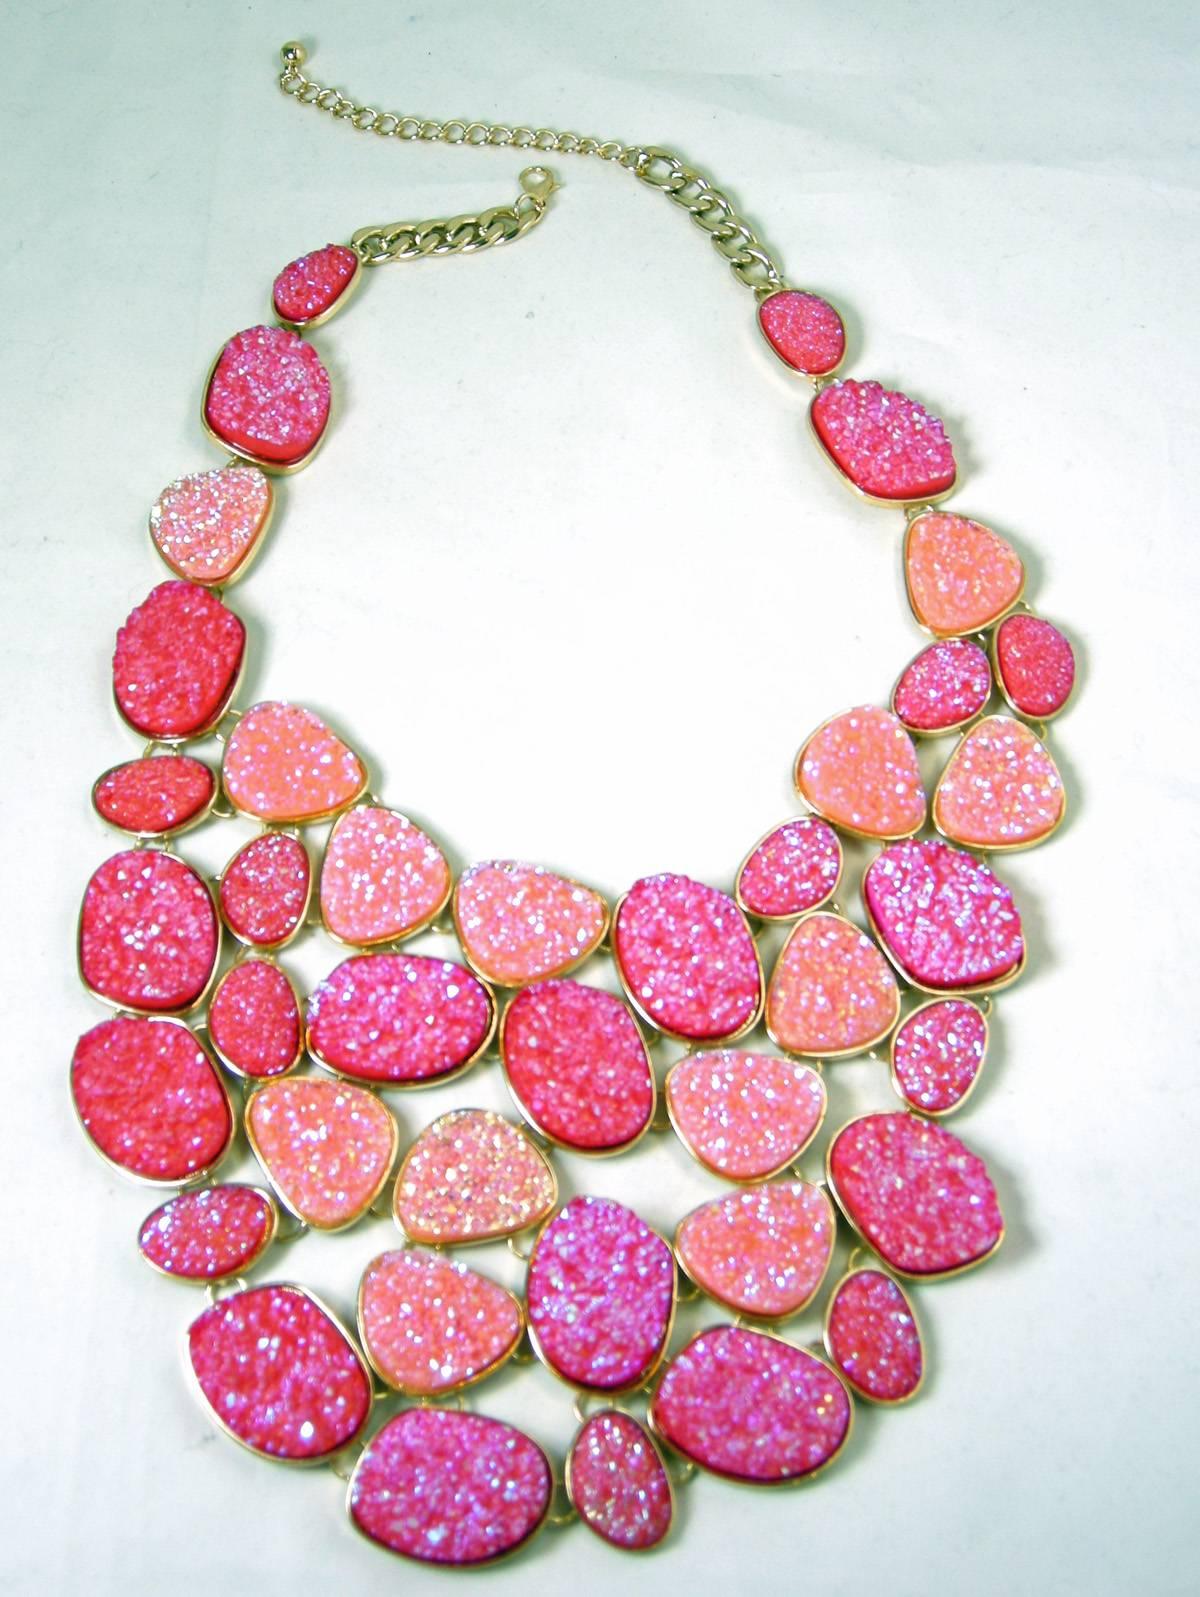 I had this necklace in another color signed Oscar de la Renta, but this one is not signed … but still gorgeous.  It is created with different shades of Druzy crystallized stones in various shaped disks designed in an extravagant bib necklace. Each